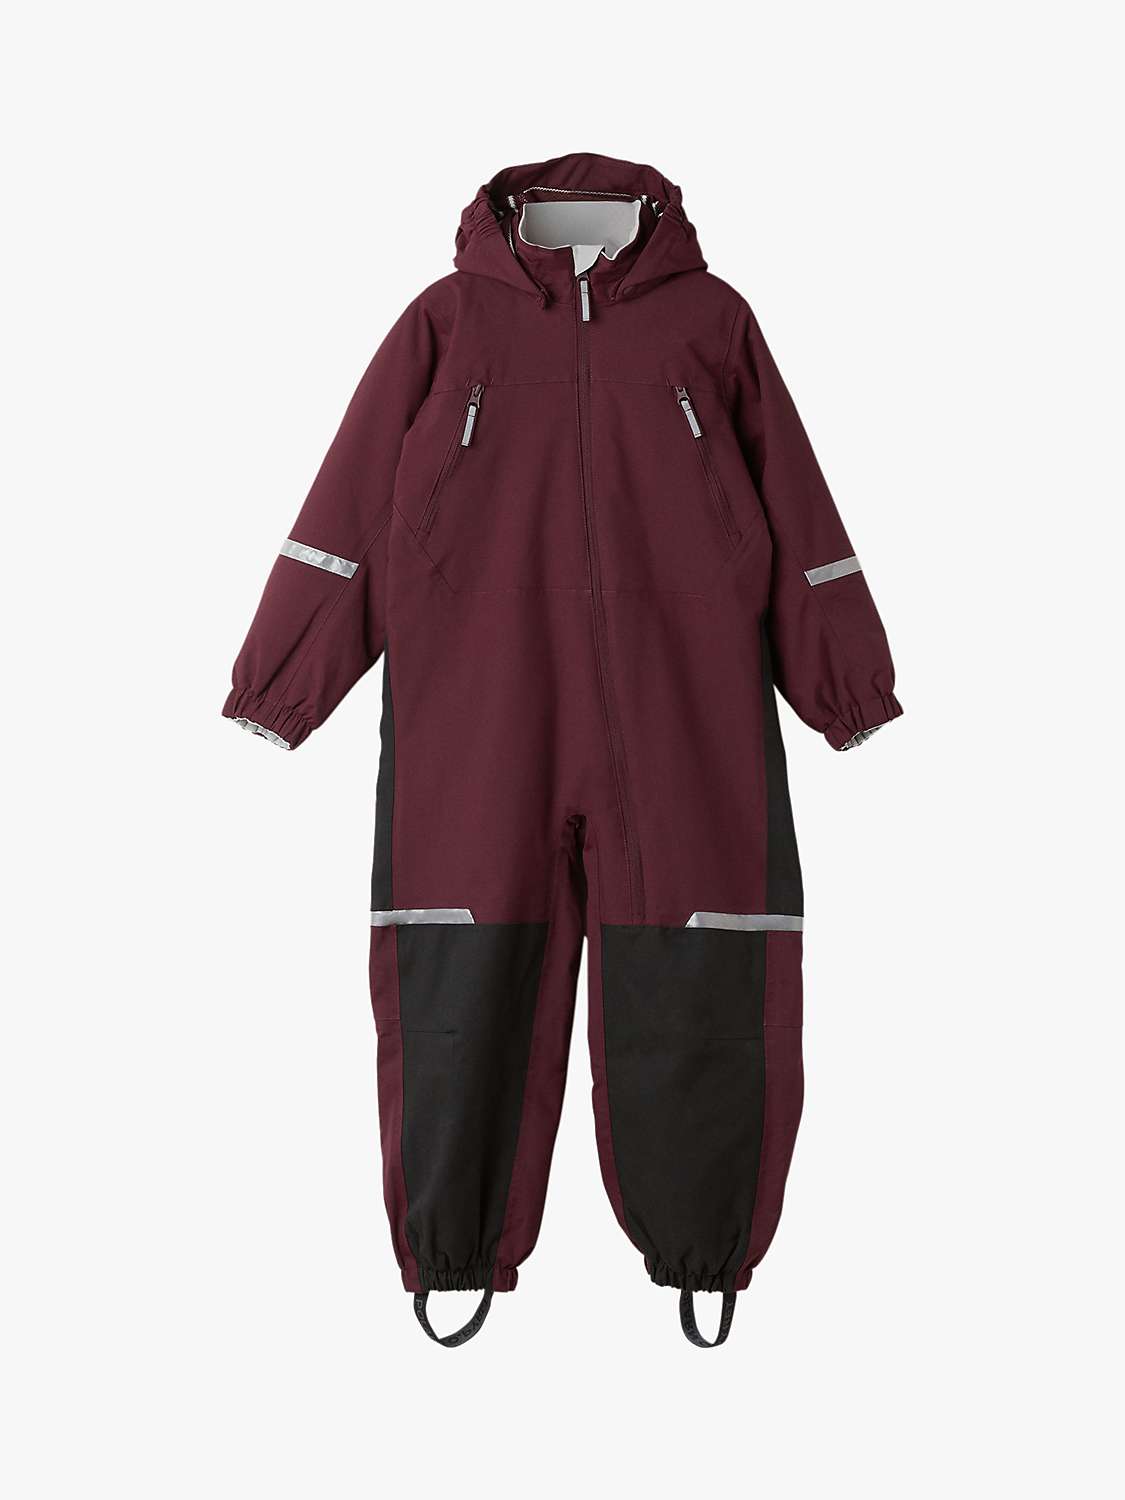 Buy Polarn O. Pyret Kids' Waterproof Lined Overall, Red Online at johnlewis.com